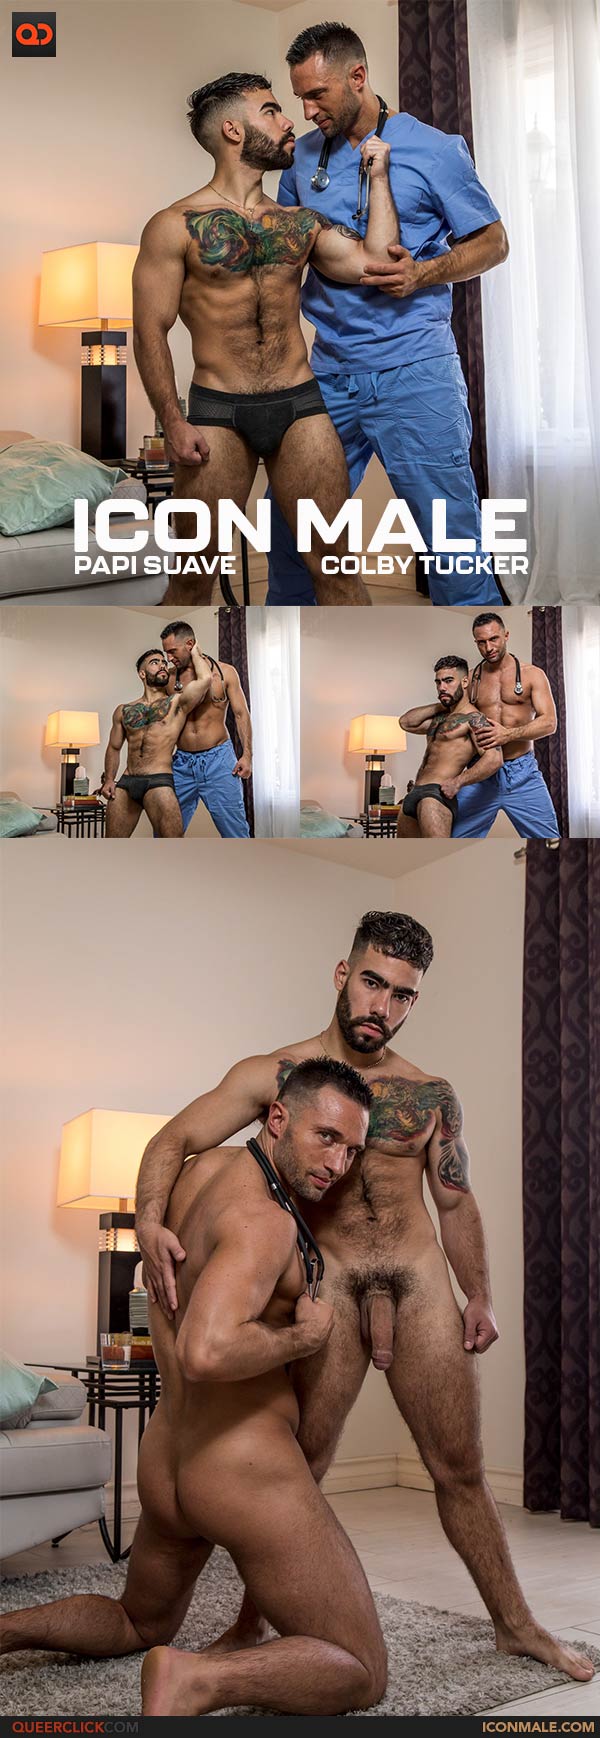 IconMale: Colby Tucker and Papi Suave